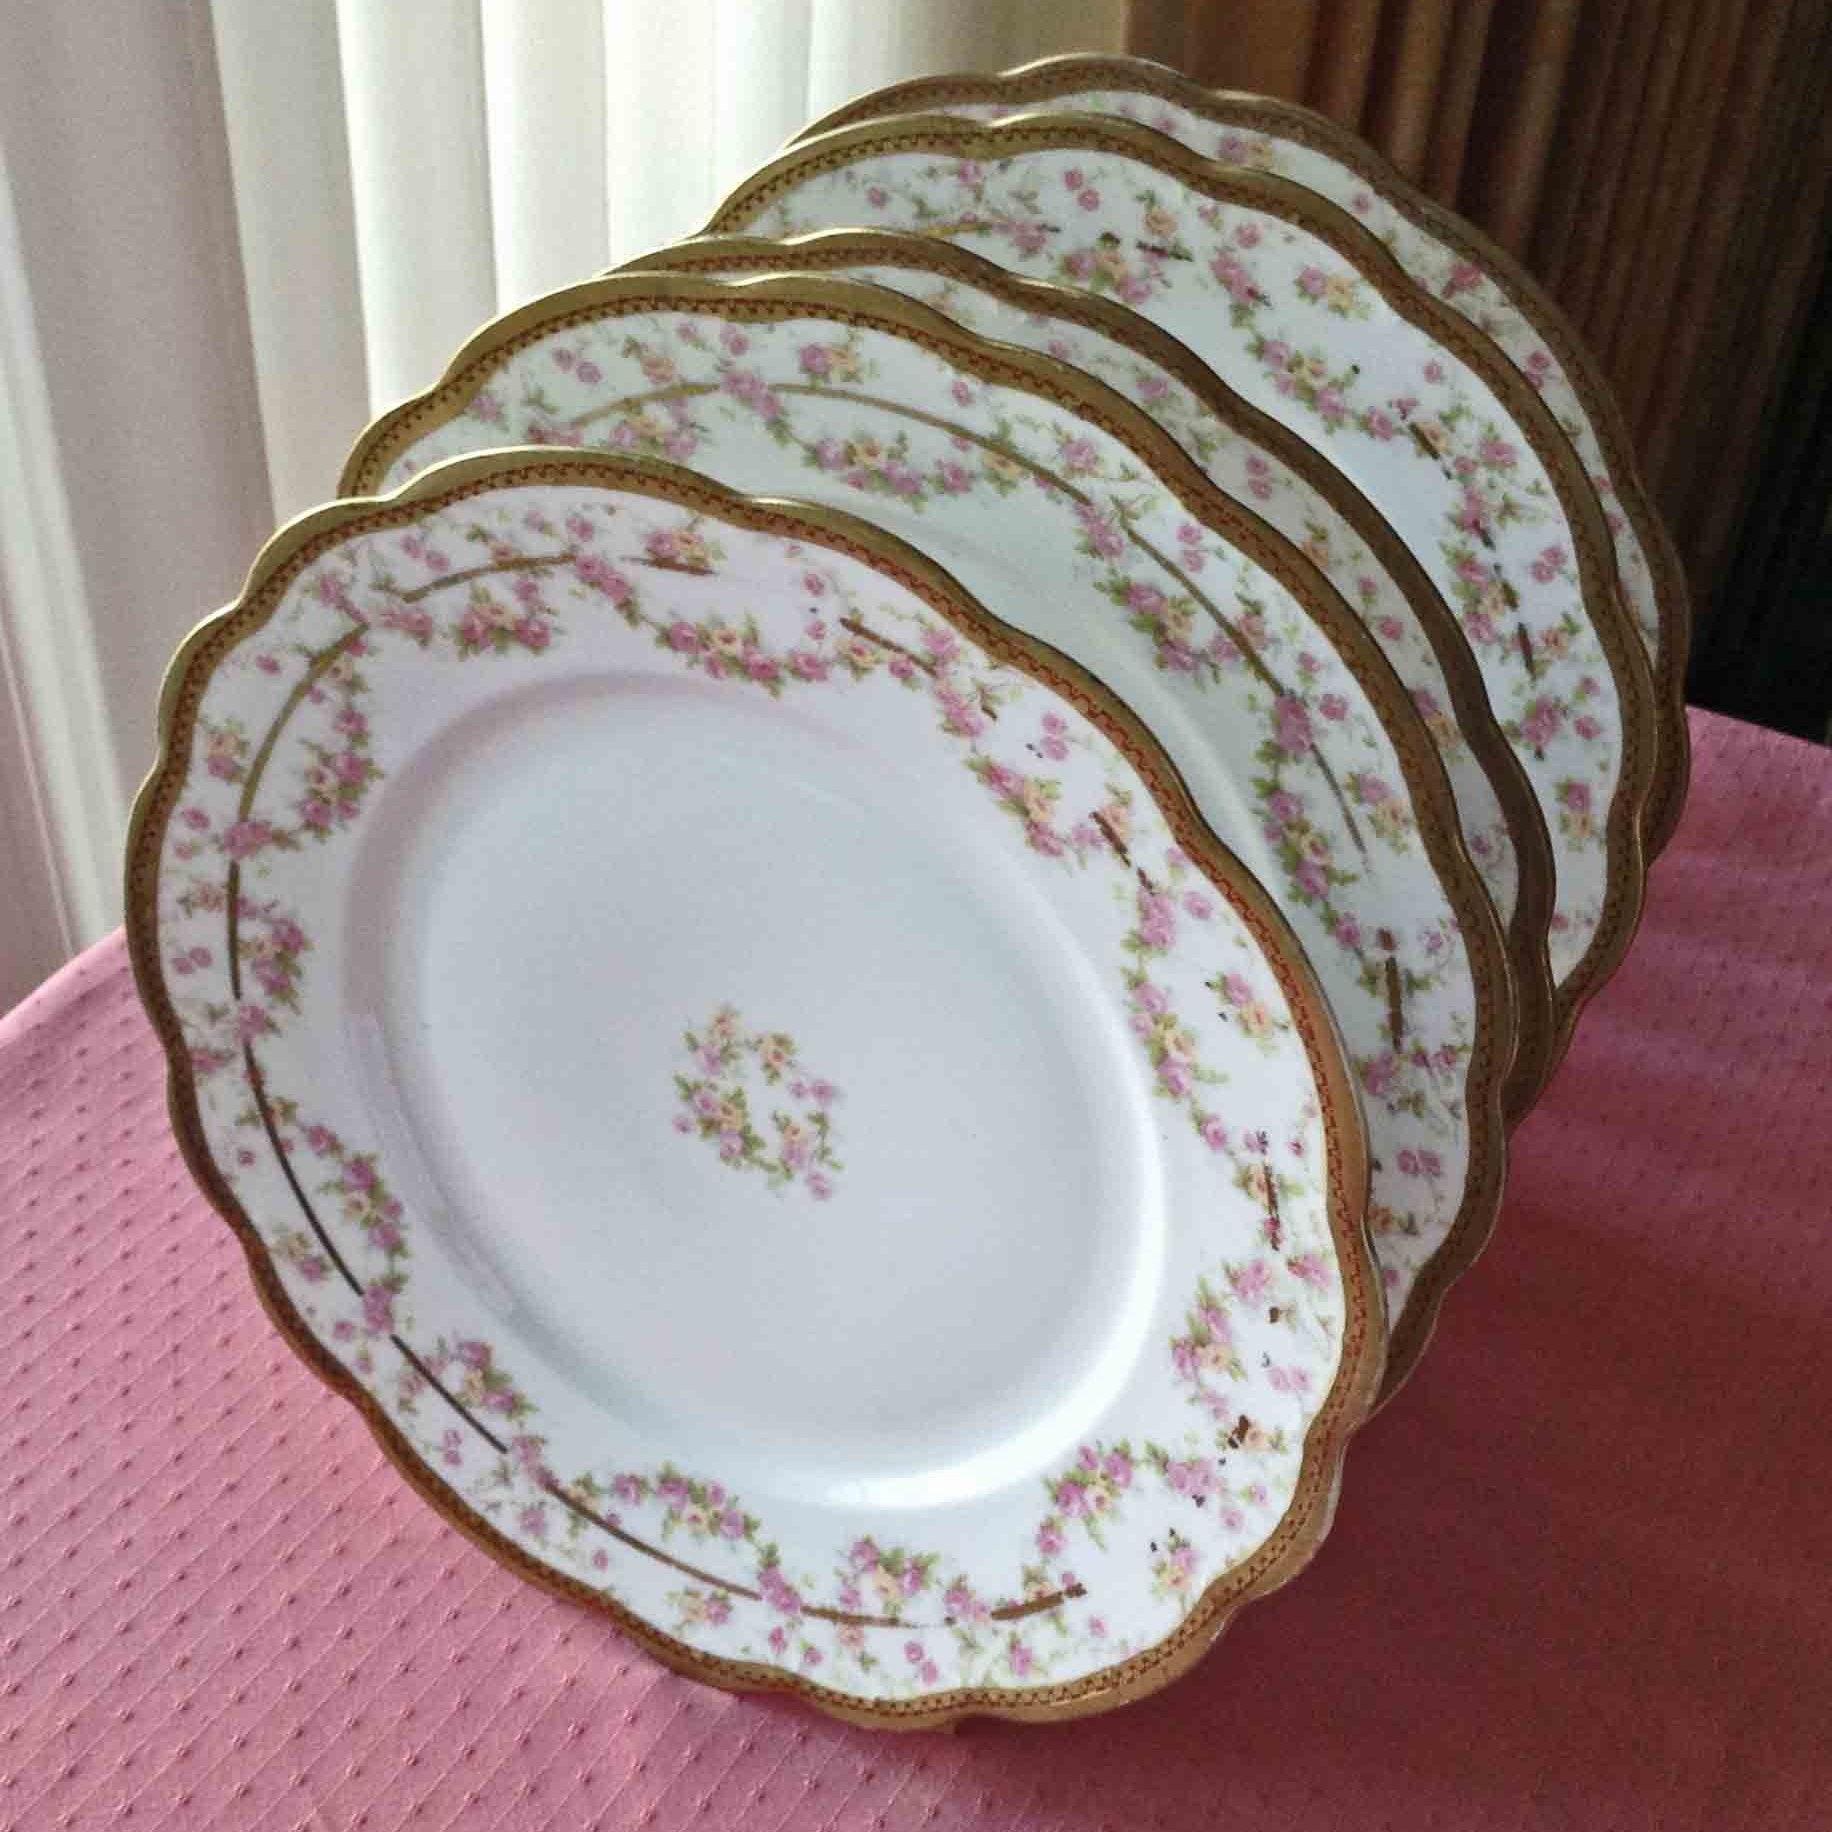 Vintage MZ Austria Pink Flowers and Gold Trim Tray 